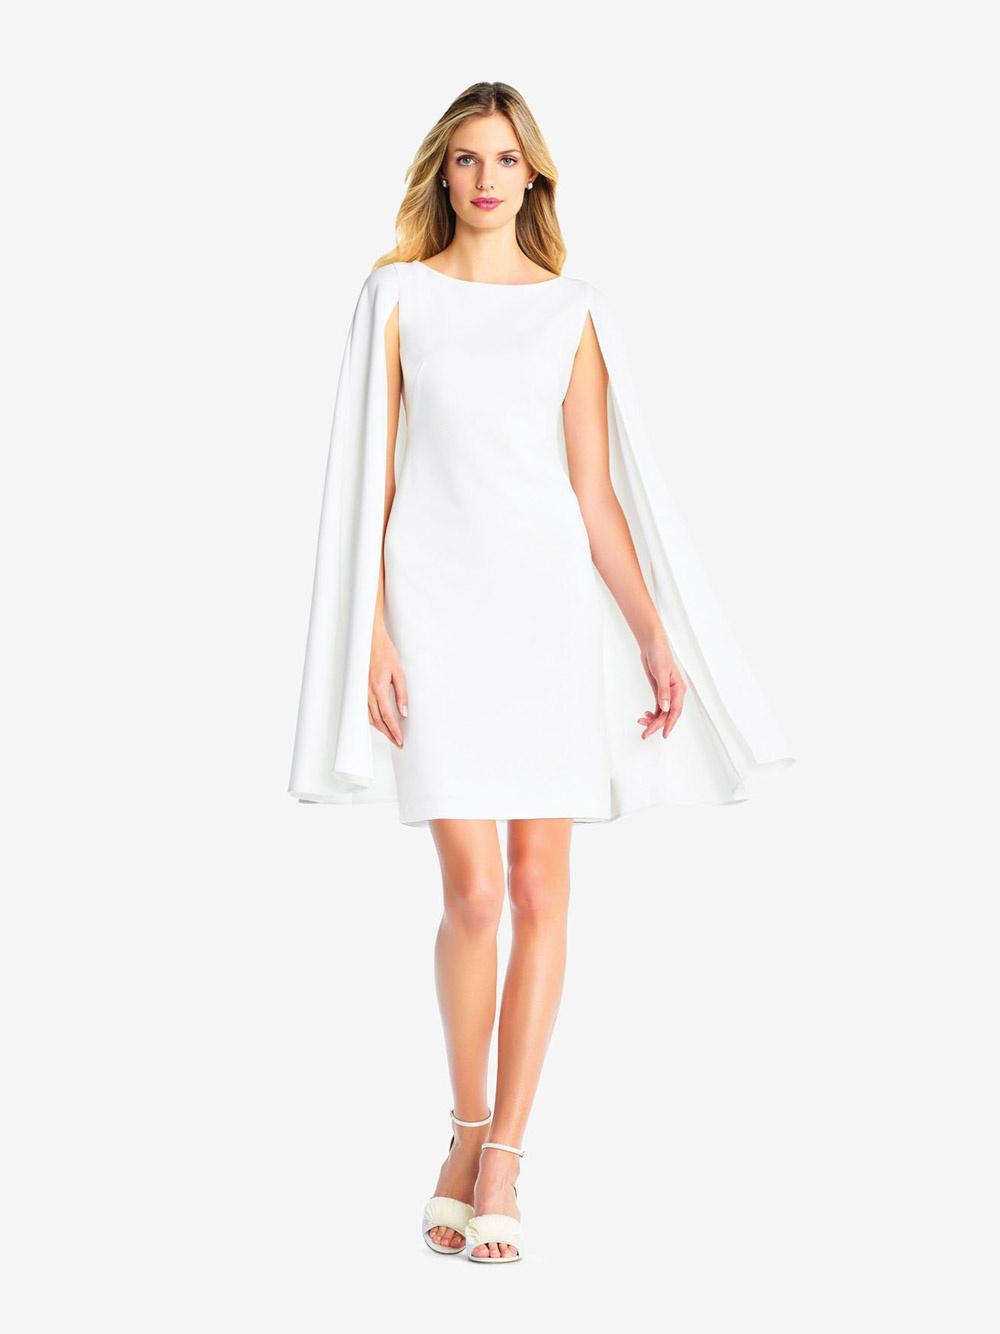 adrianna papell ivory sheath dress with high scoop neckline and cape sleeves for wedding after party outfit